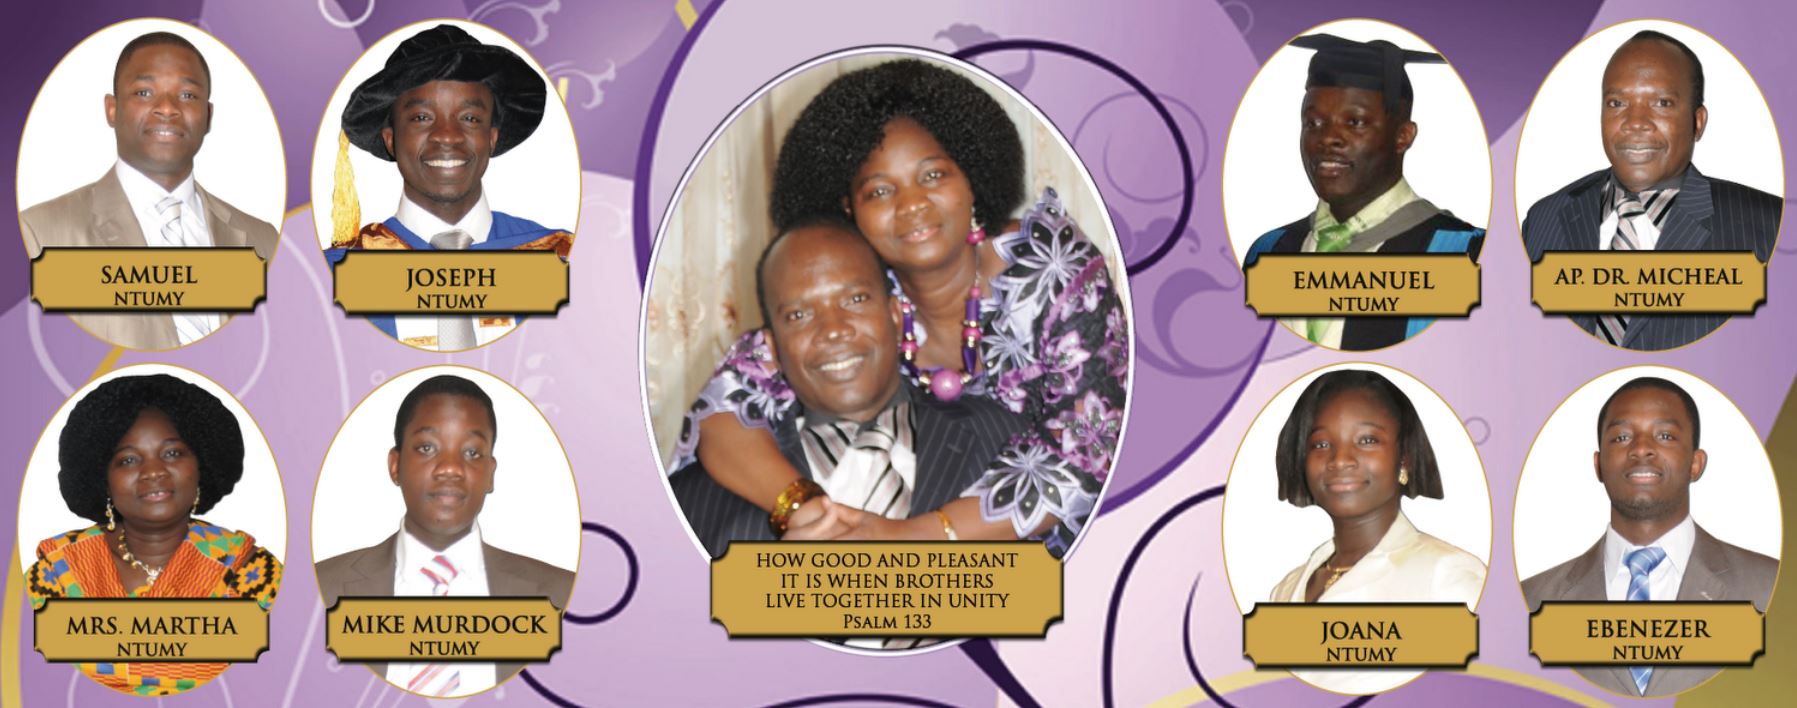 Apostle Dr Michael Ntumy, His Wife And Children 